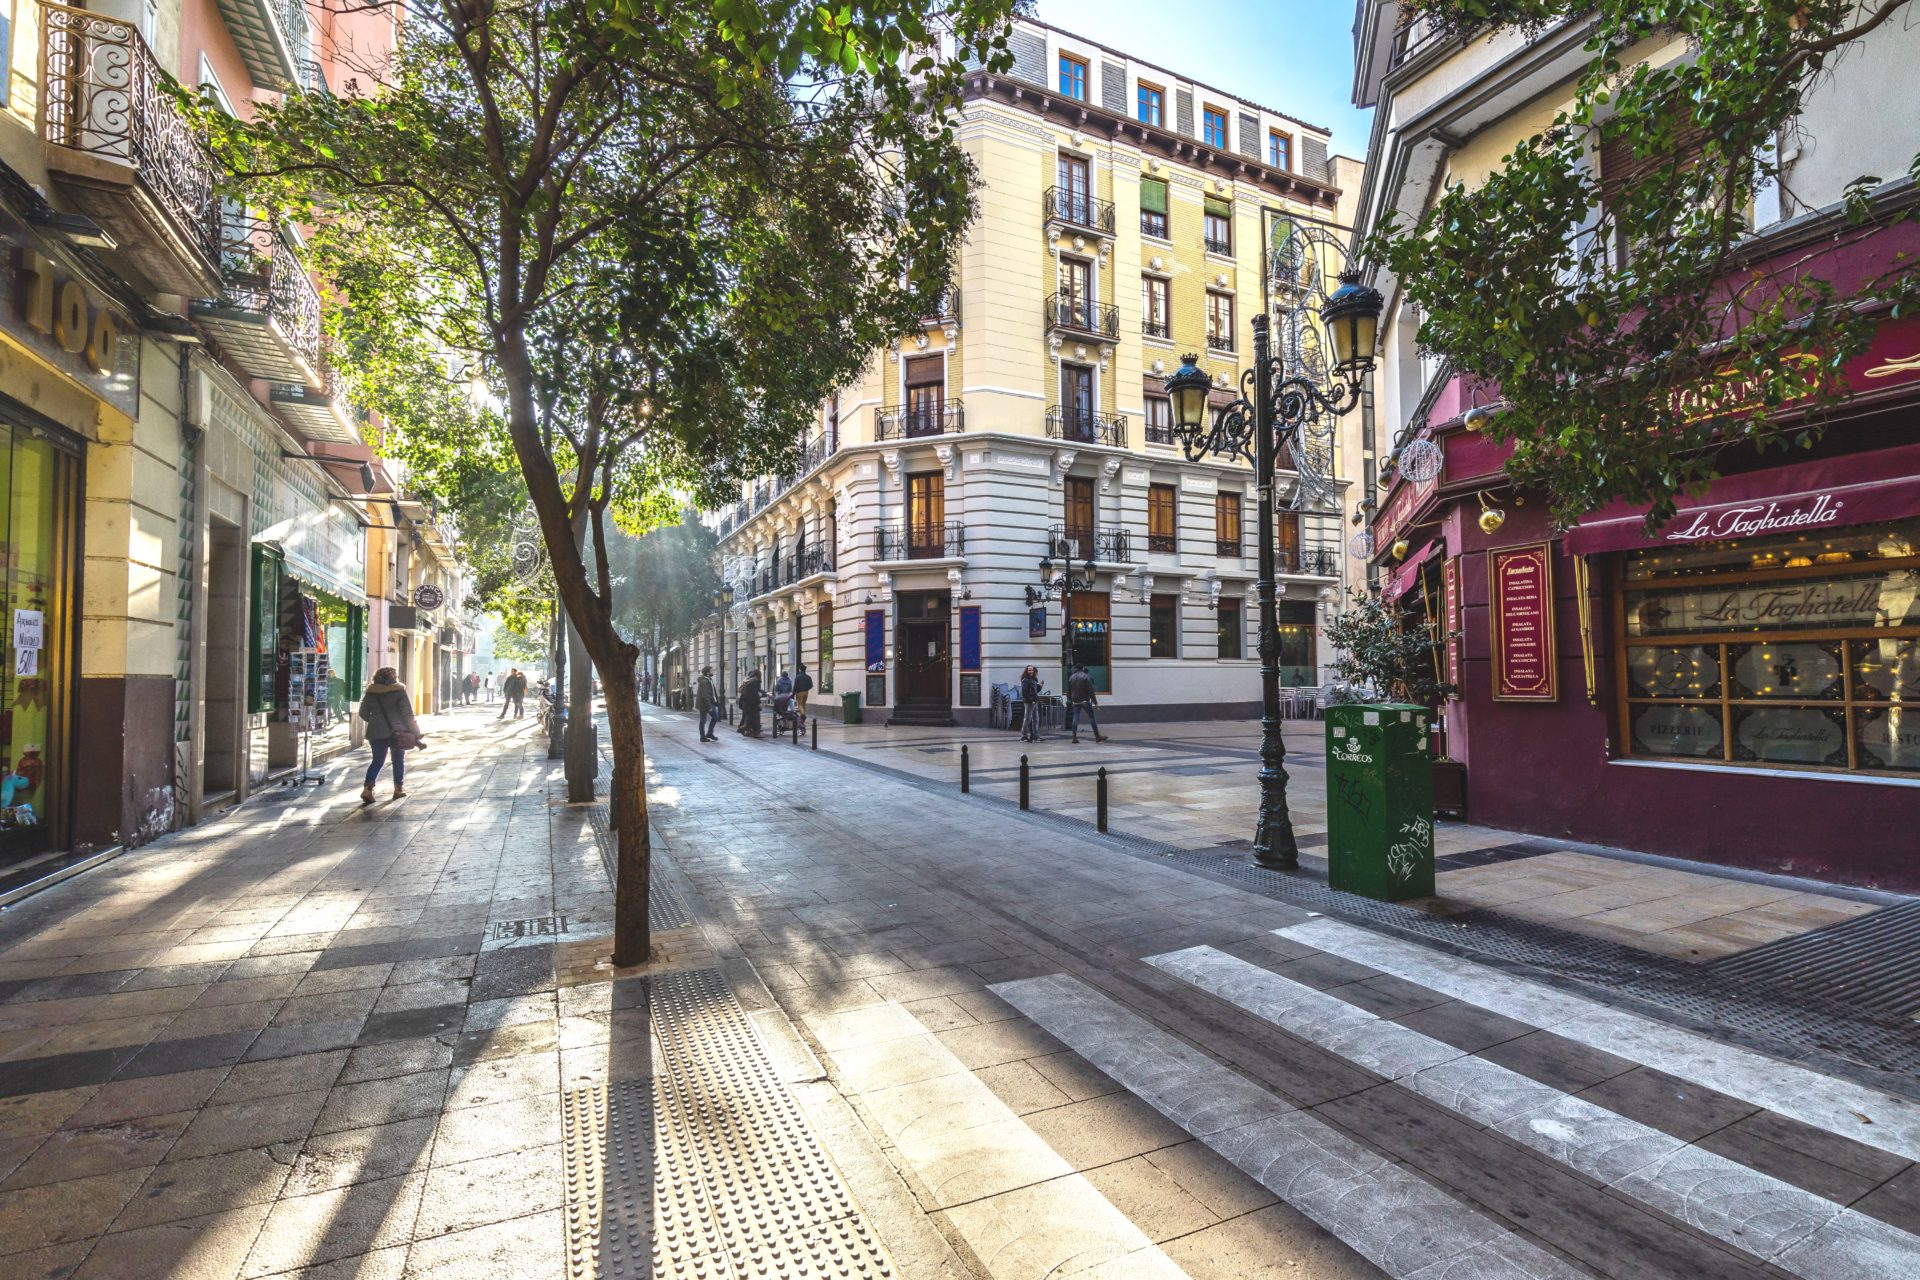 Attractive apartment buildings and cafes in Zaragoza’s old town